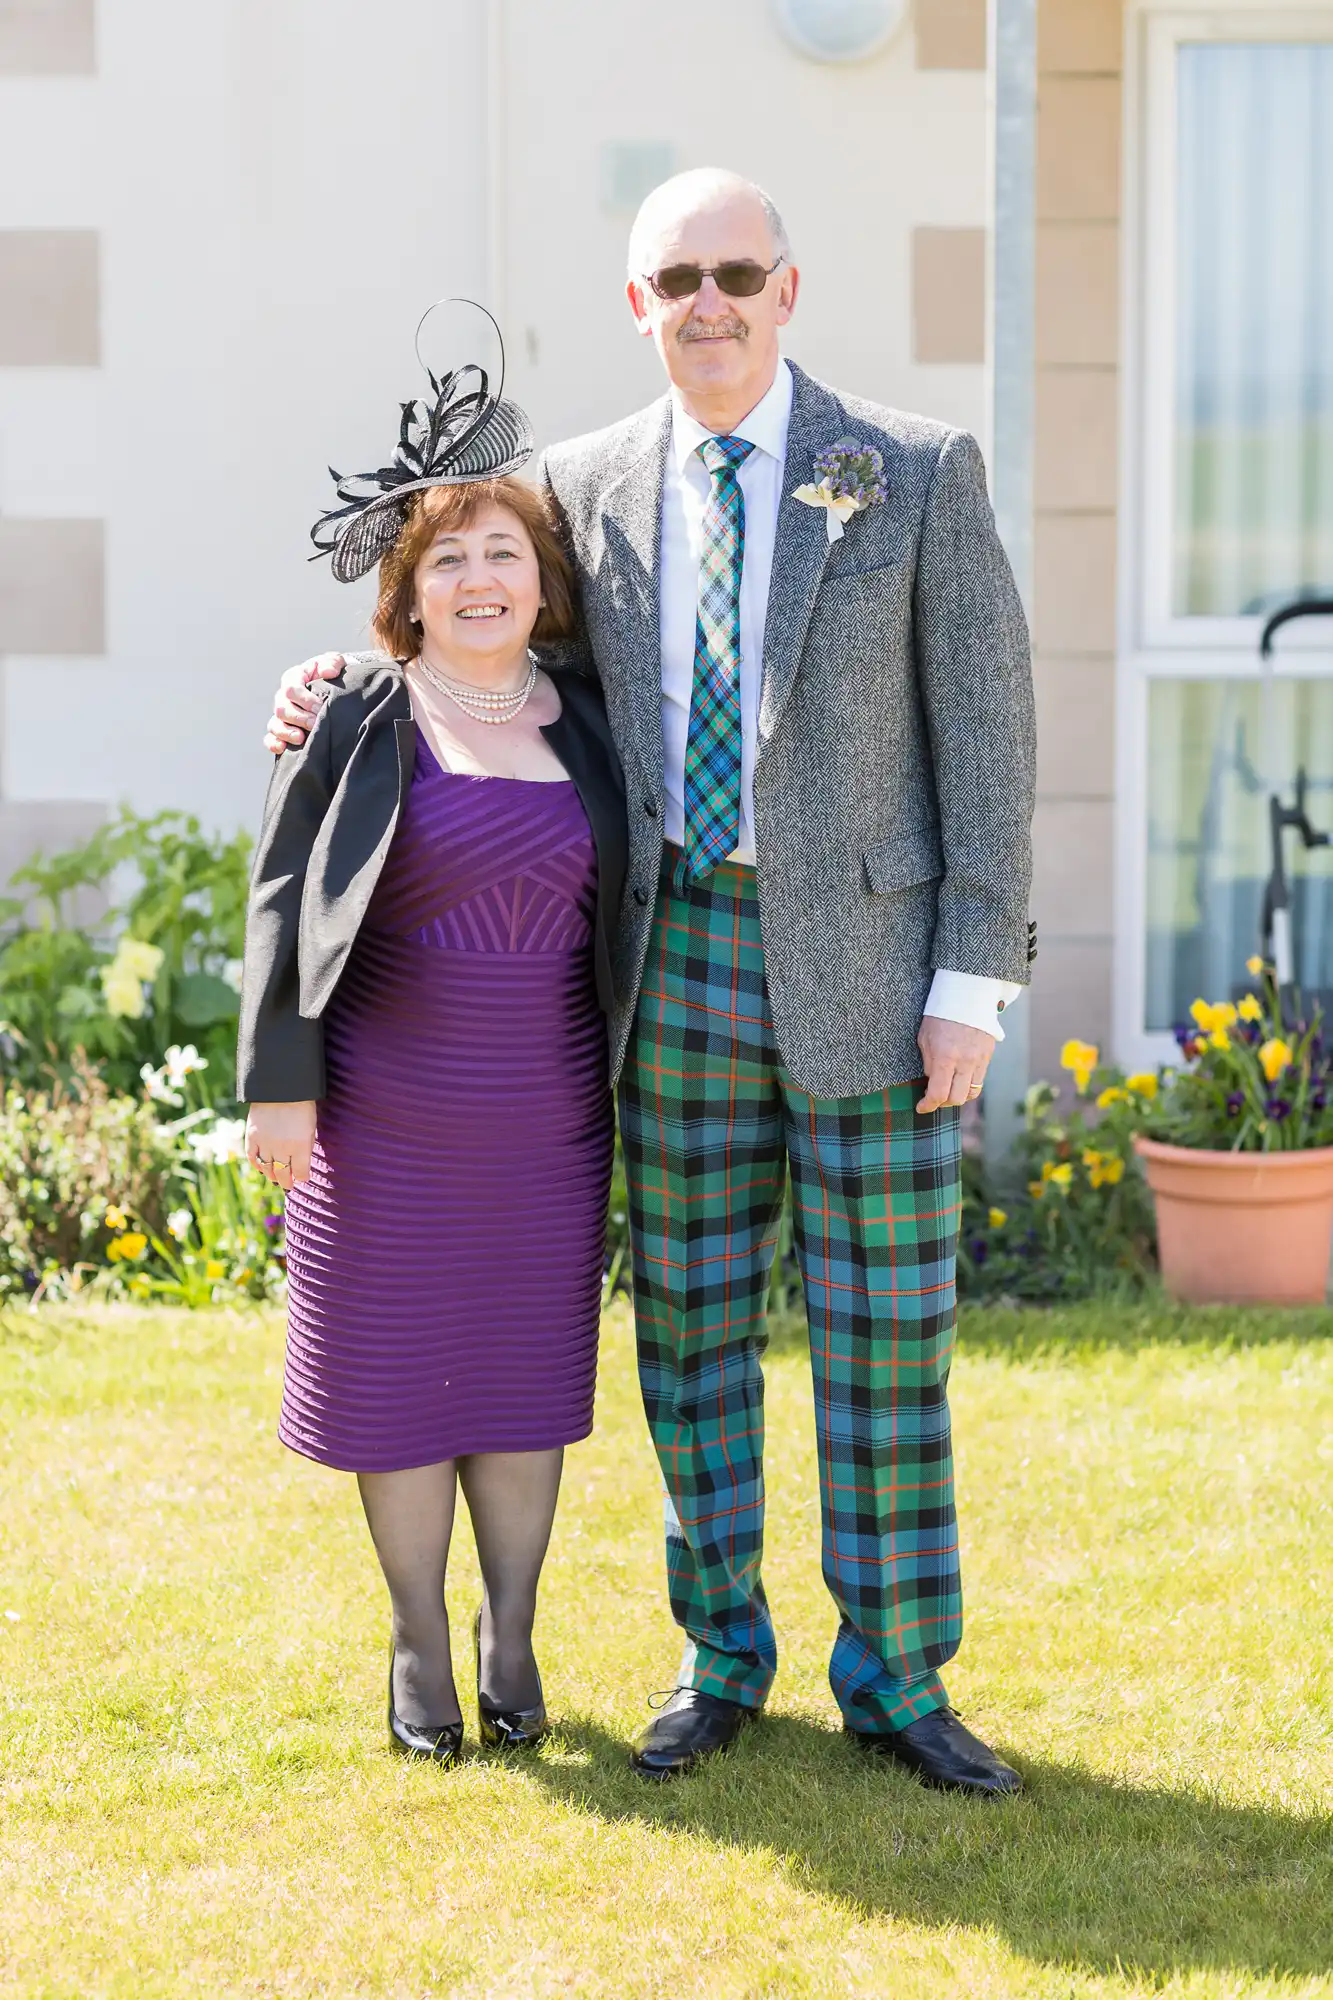 A couple dressed in formal attire, with the man in a tartan kilt and tweed jacket, and the woman in a purple dress and black fascinator, standing together outside on a sunny day.